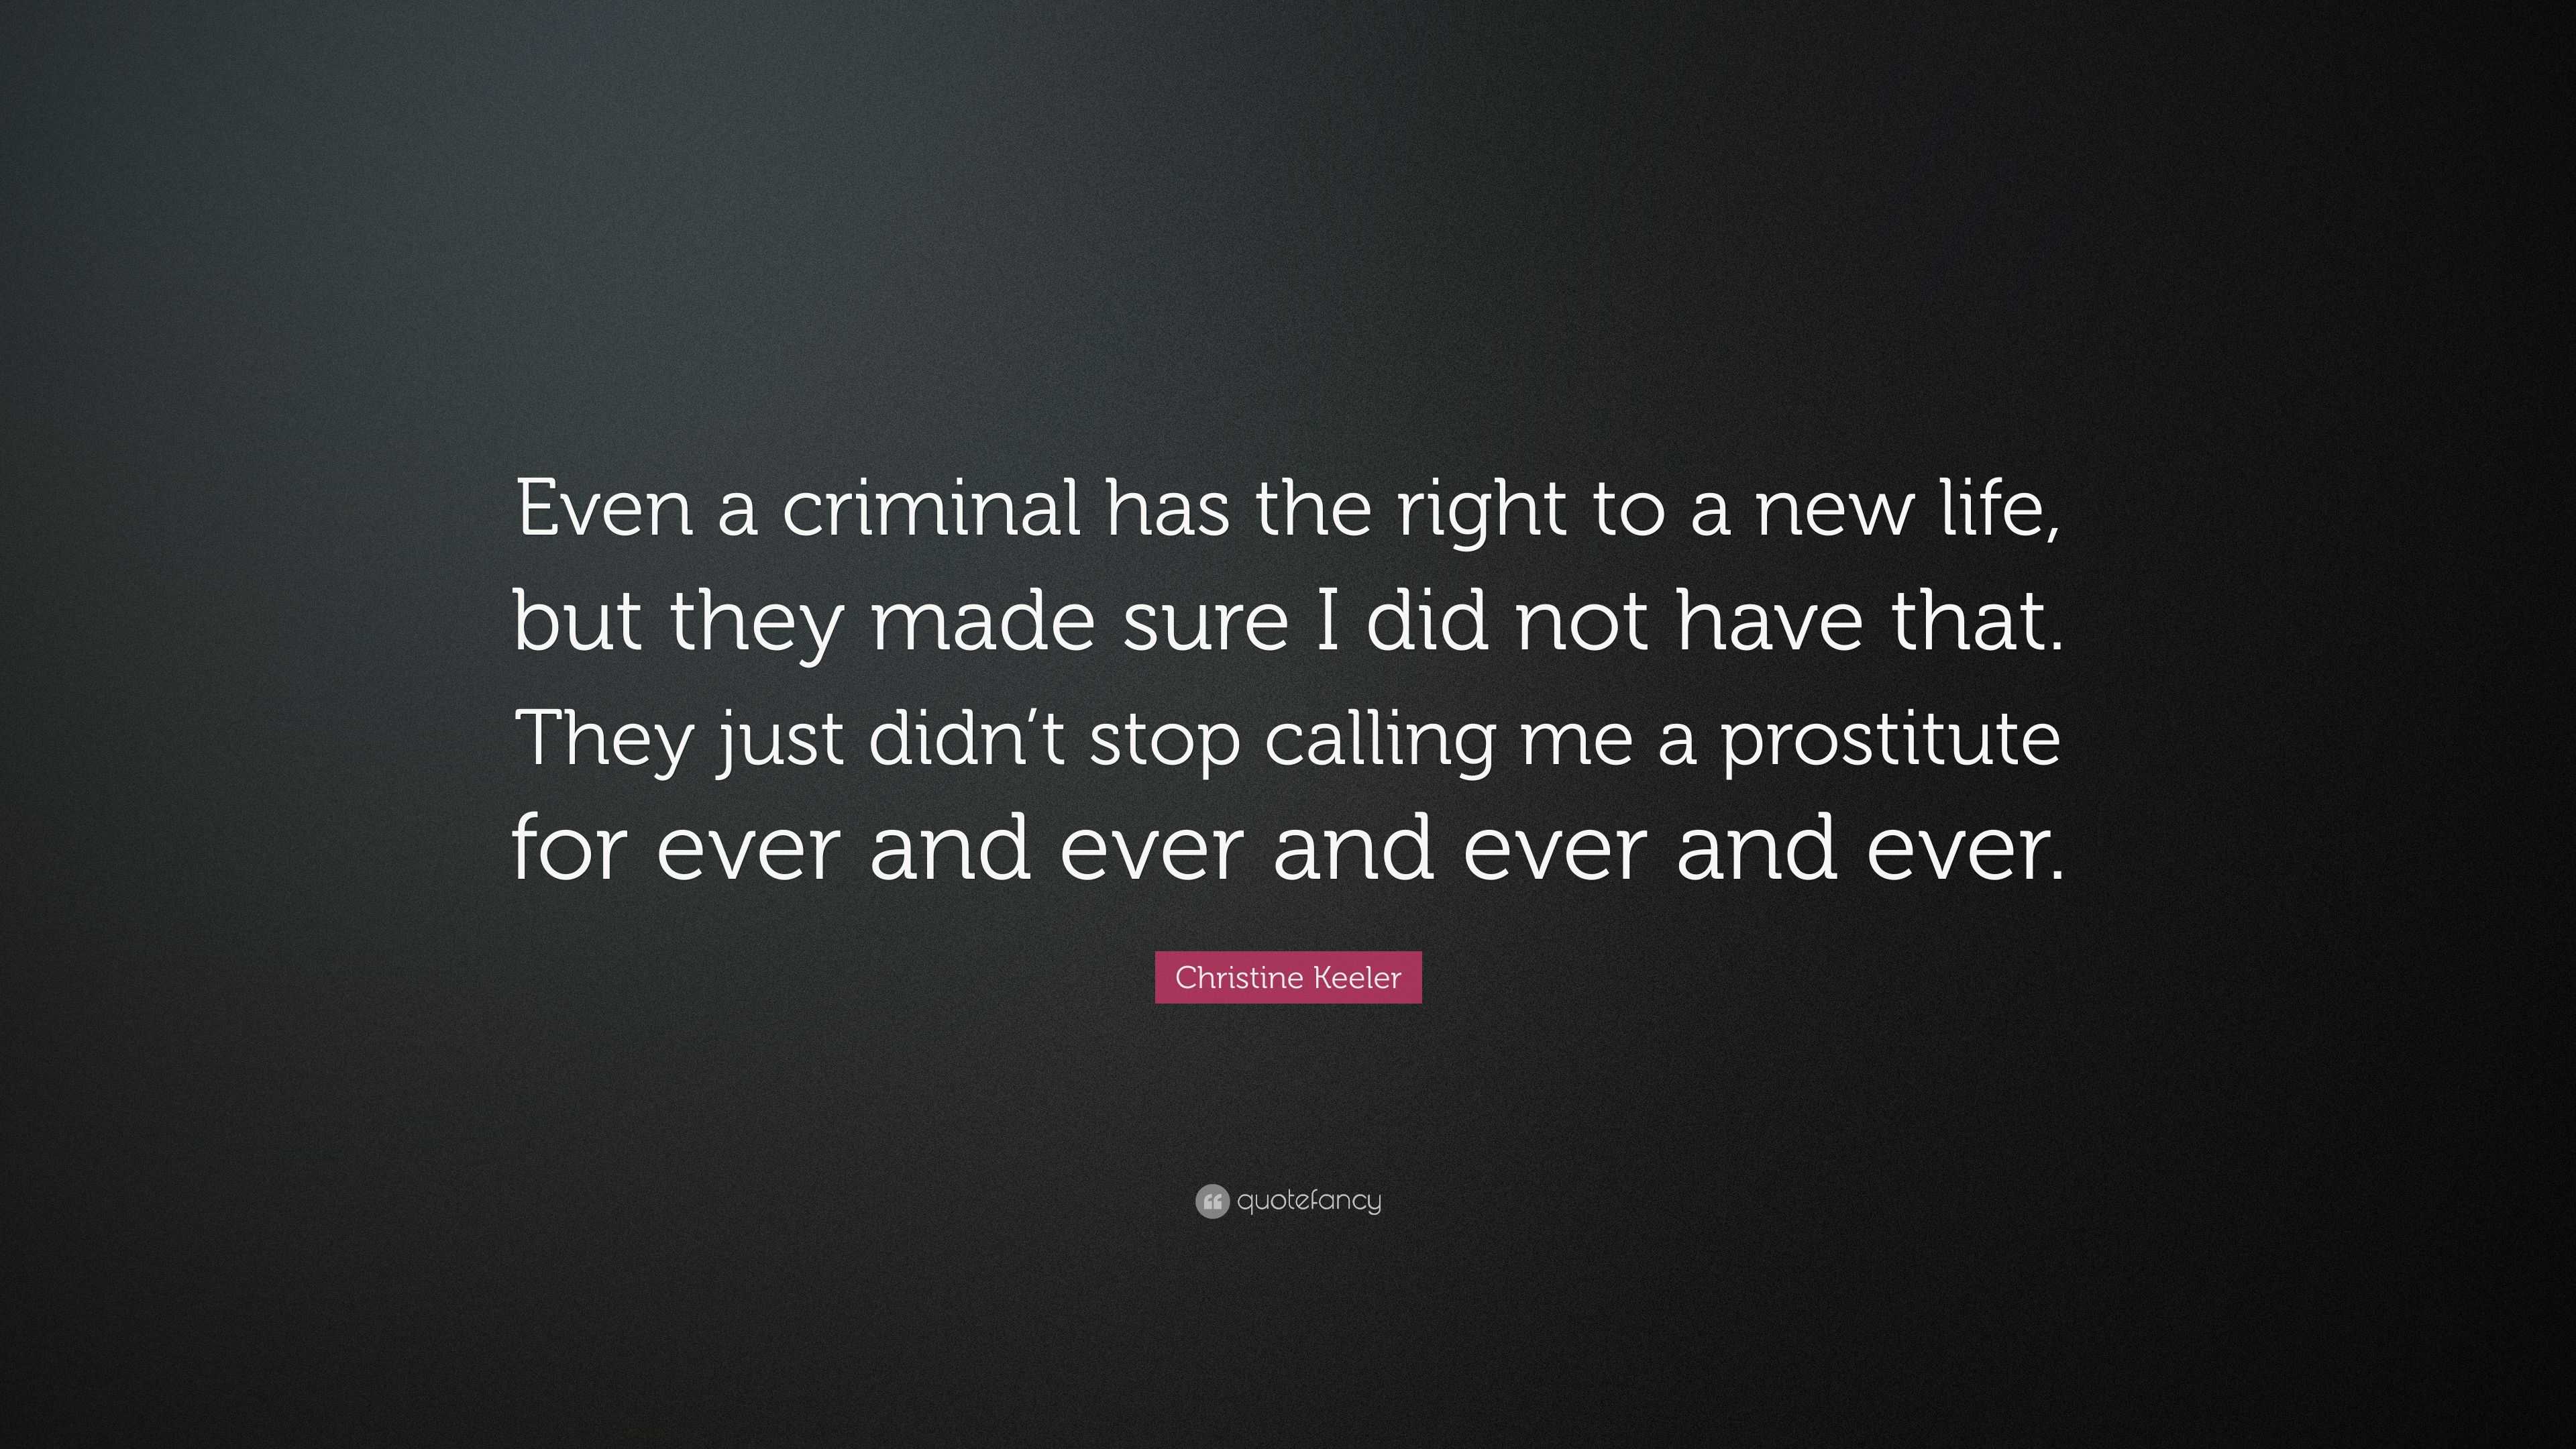 Christine Keeler Quote: “Even a criminal has the right to a new life ...